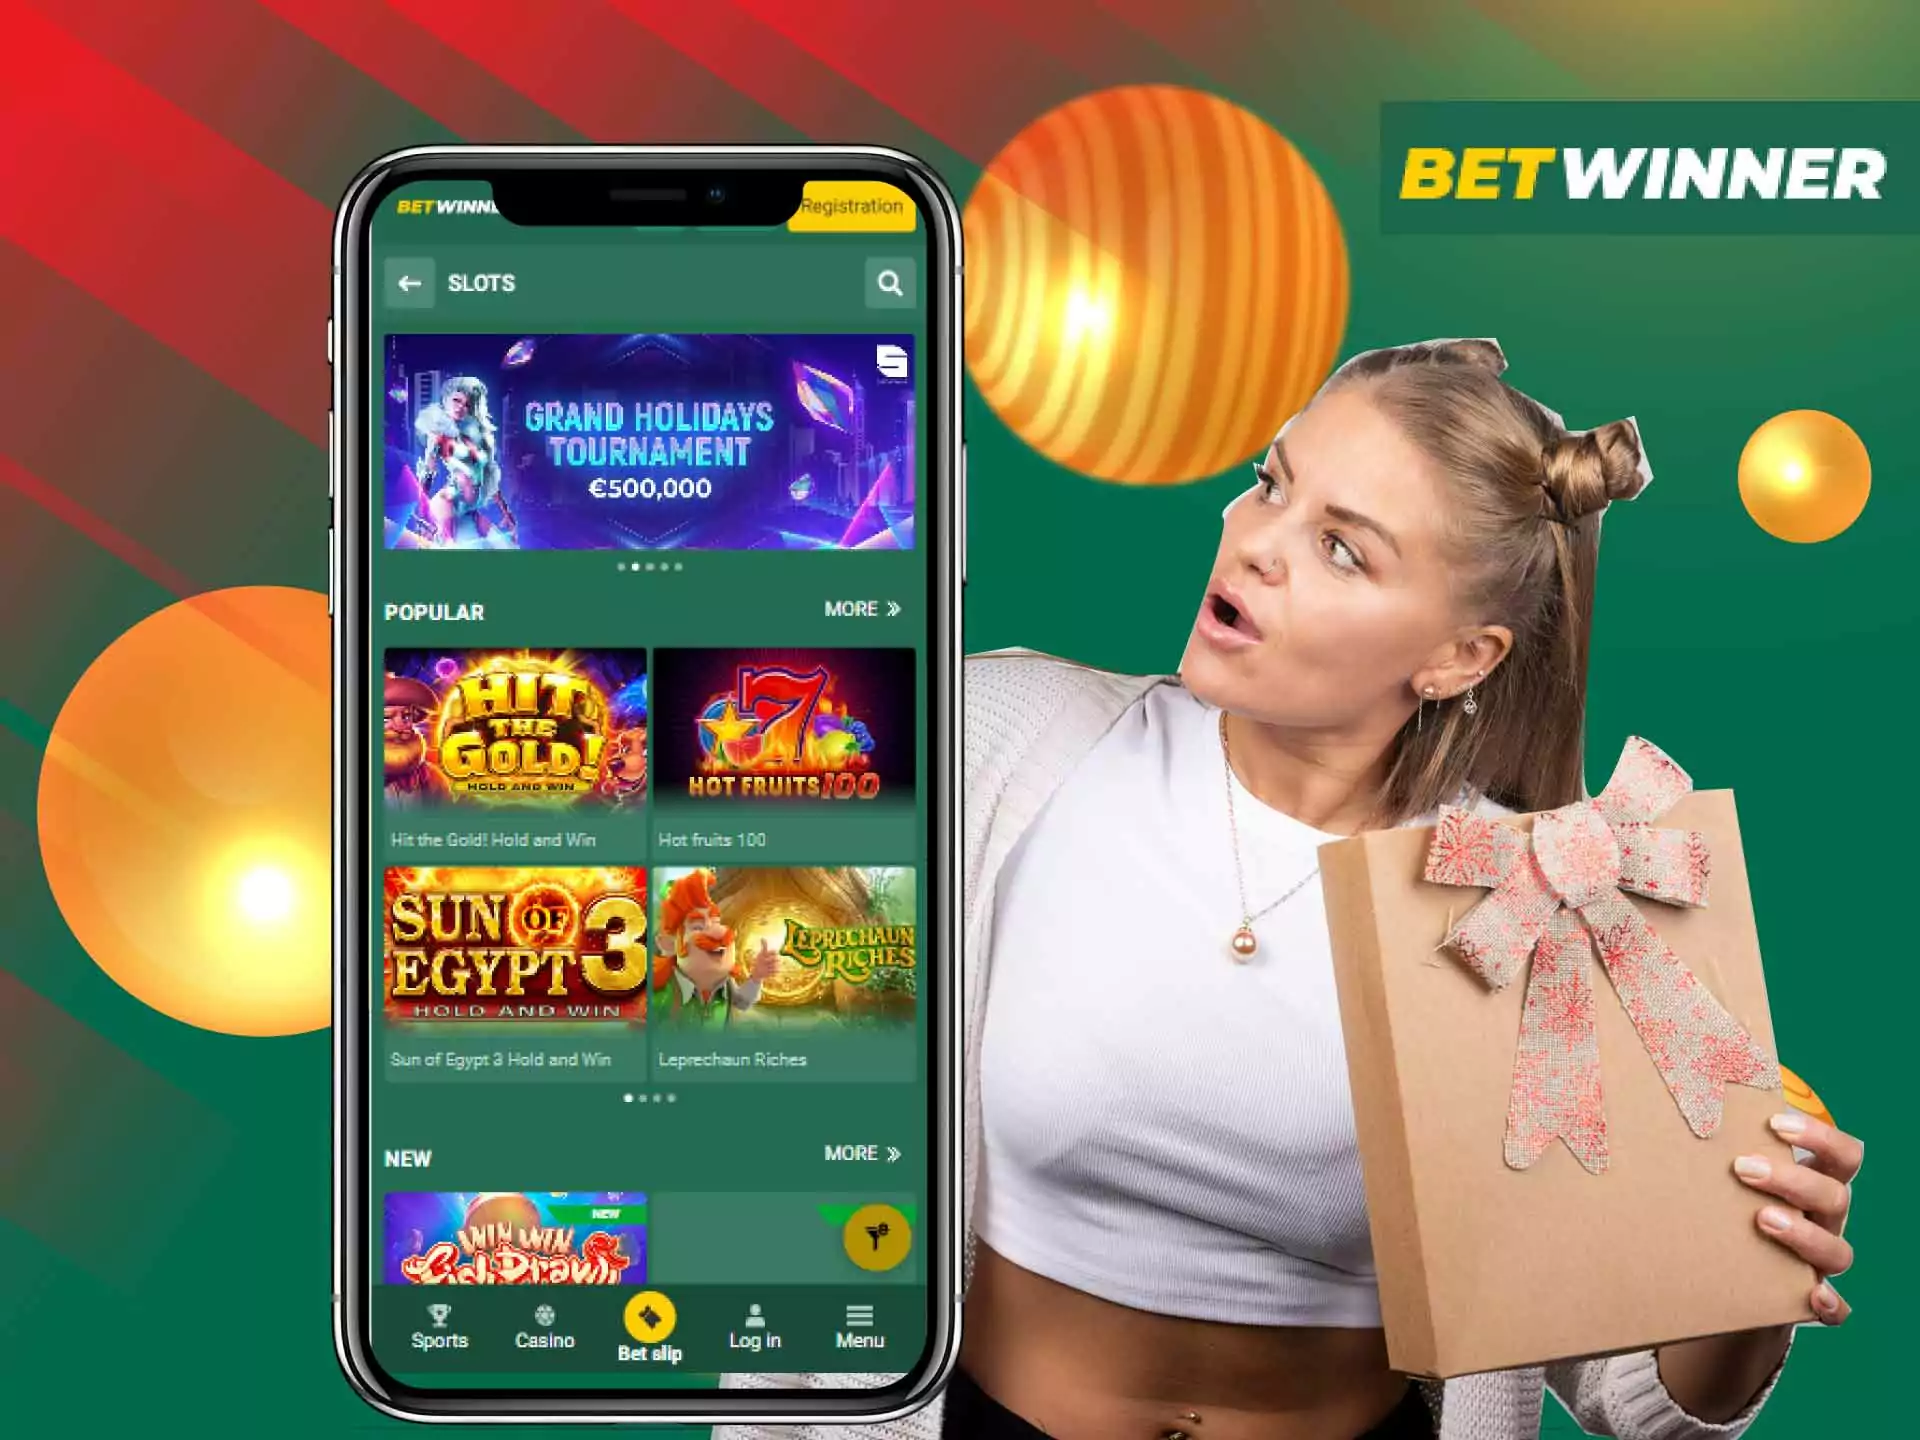 You can get up to 145400 BDT on casino games as a welcome bonus from Betwinner.